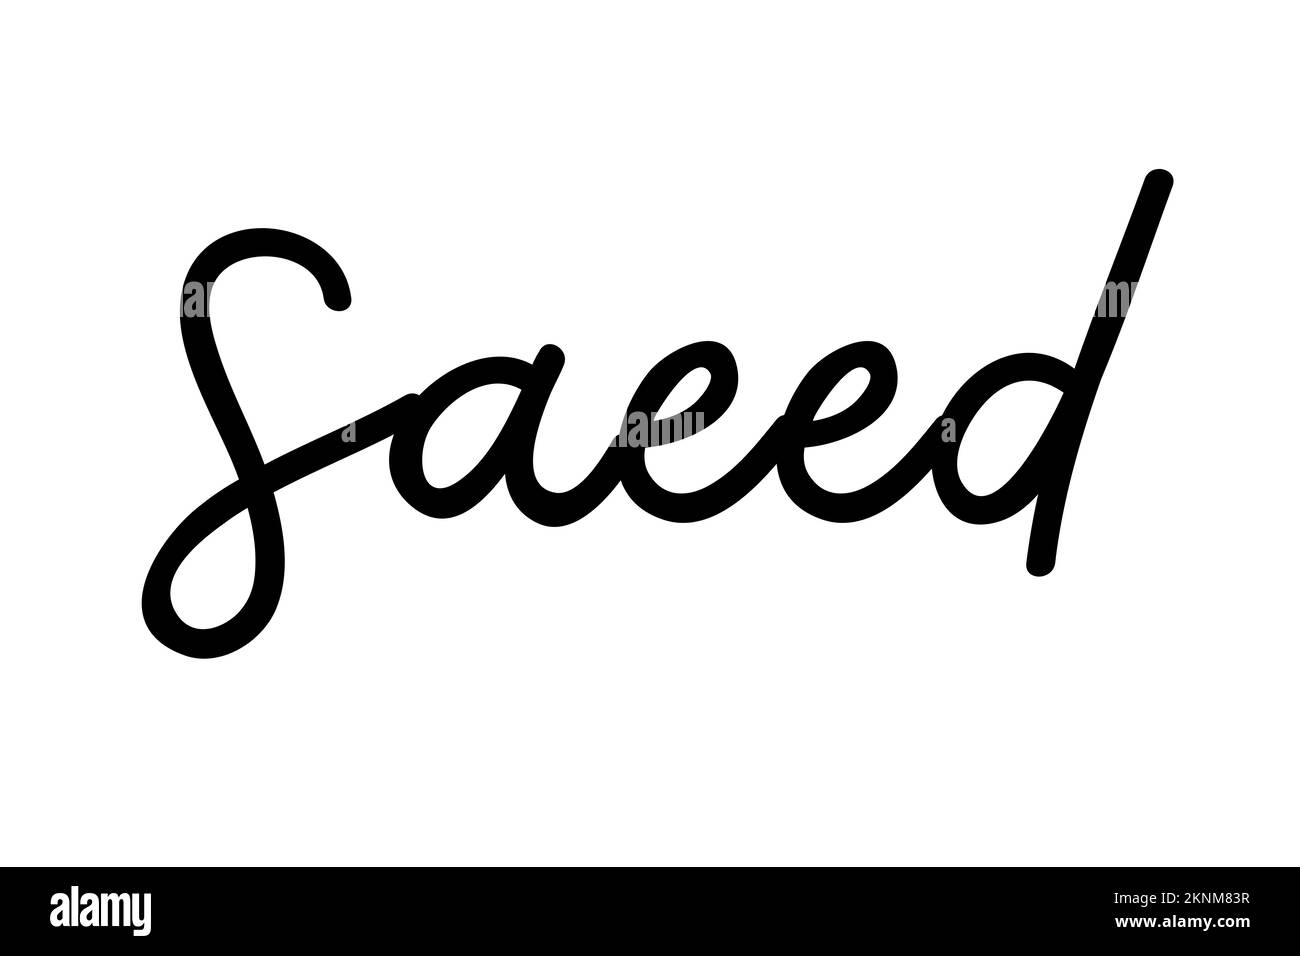 Saeed name with 3d style Stock Photo